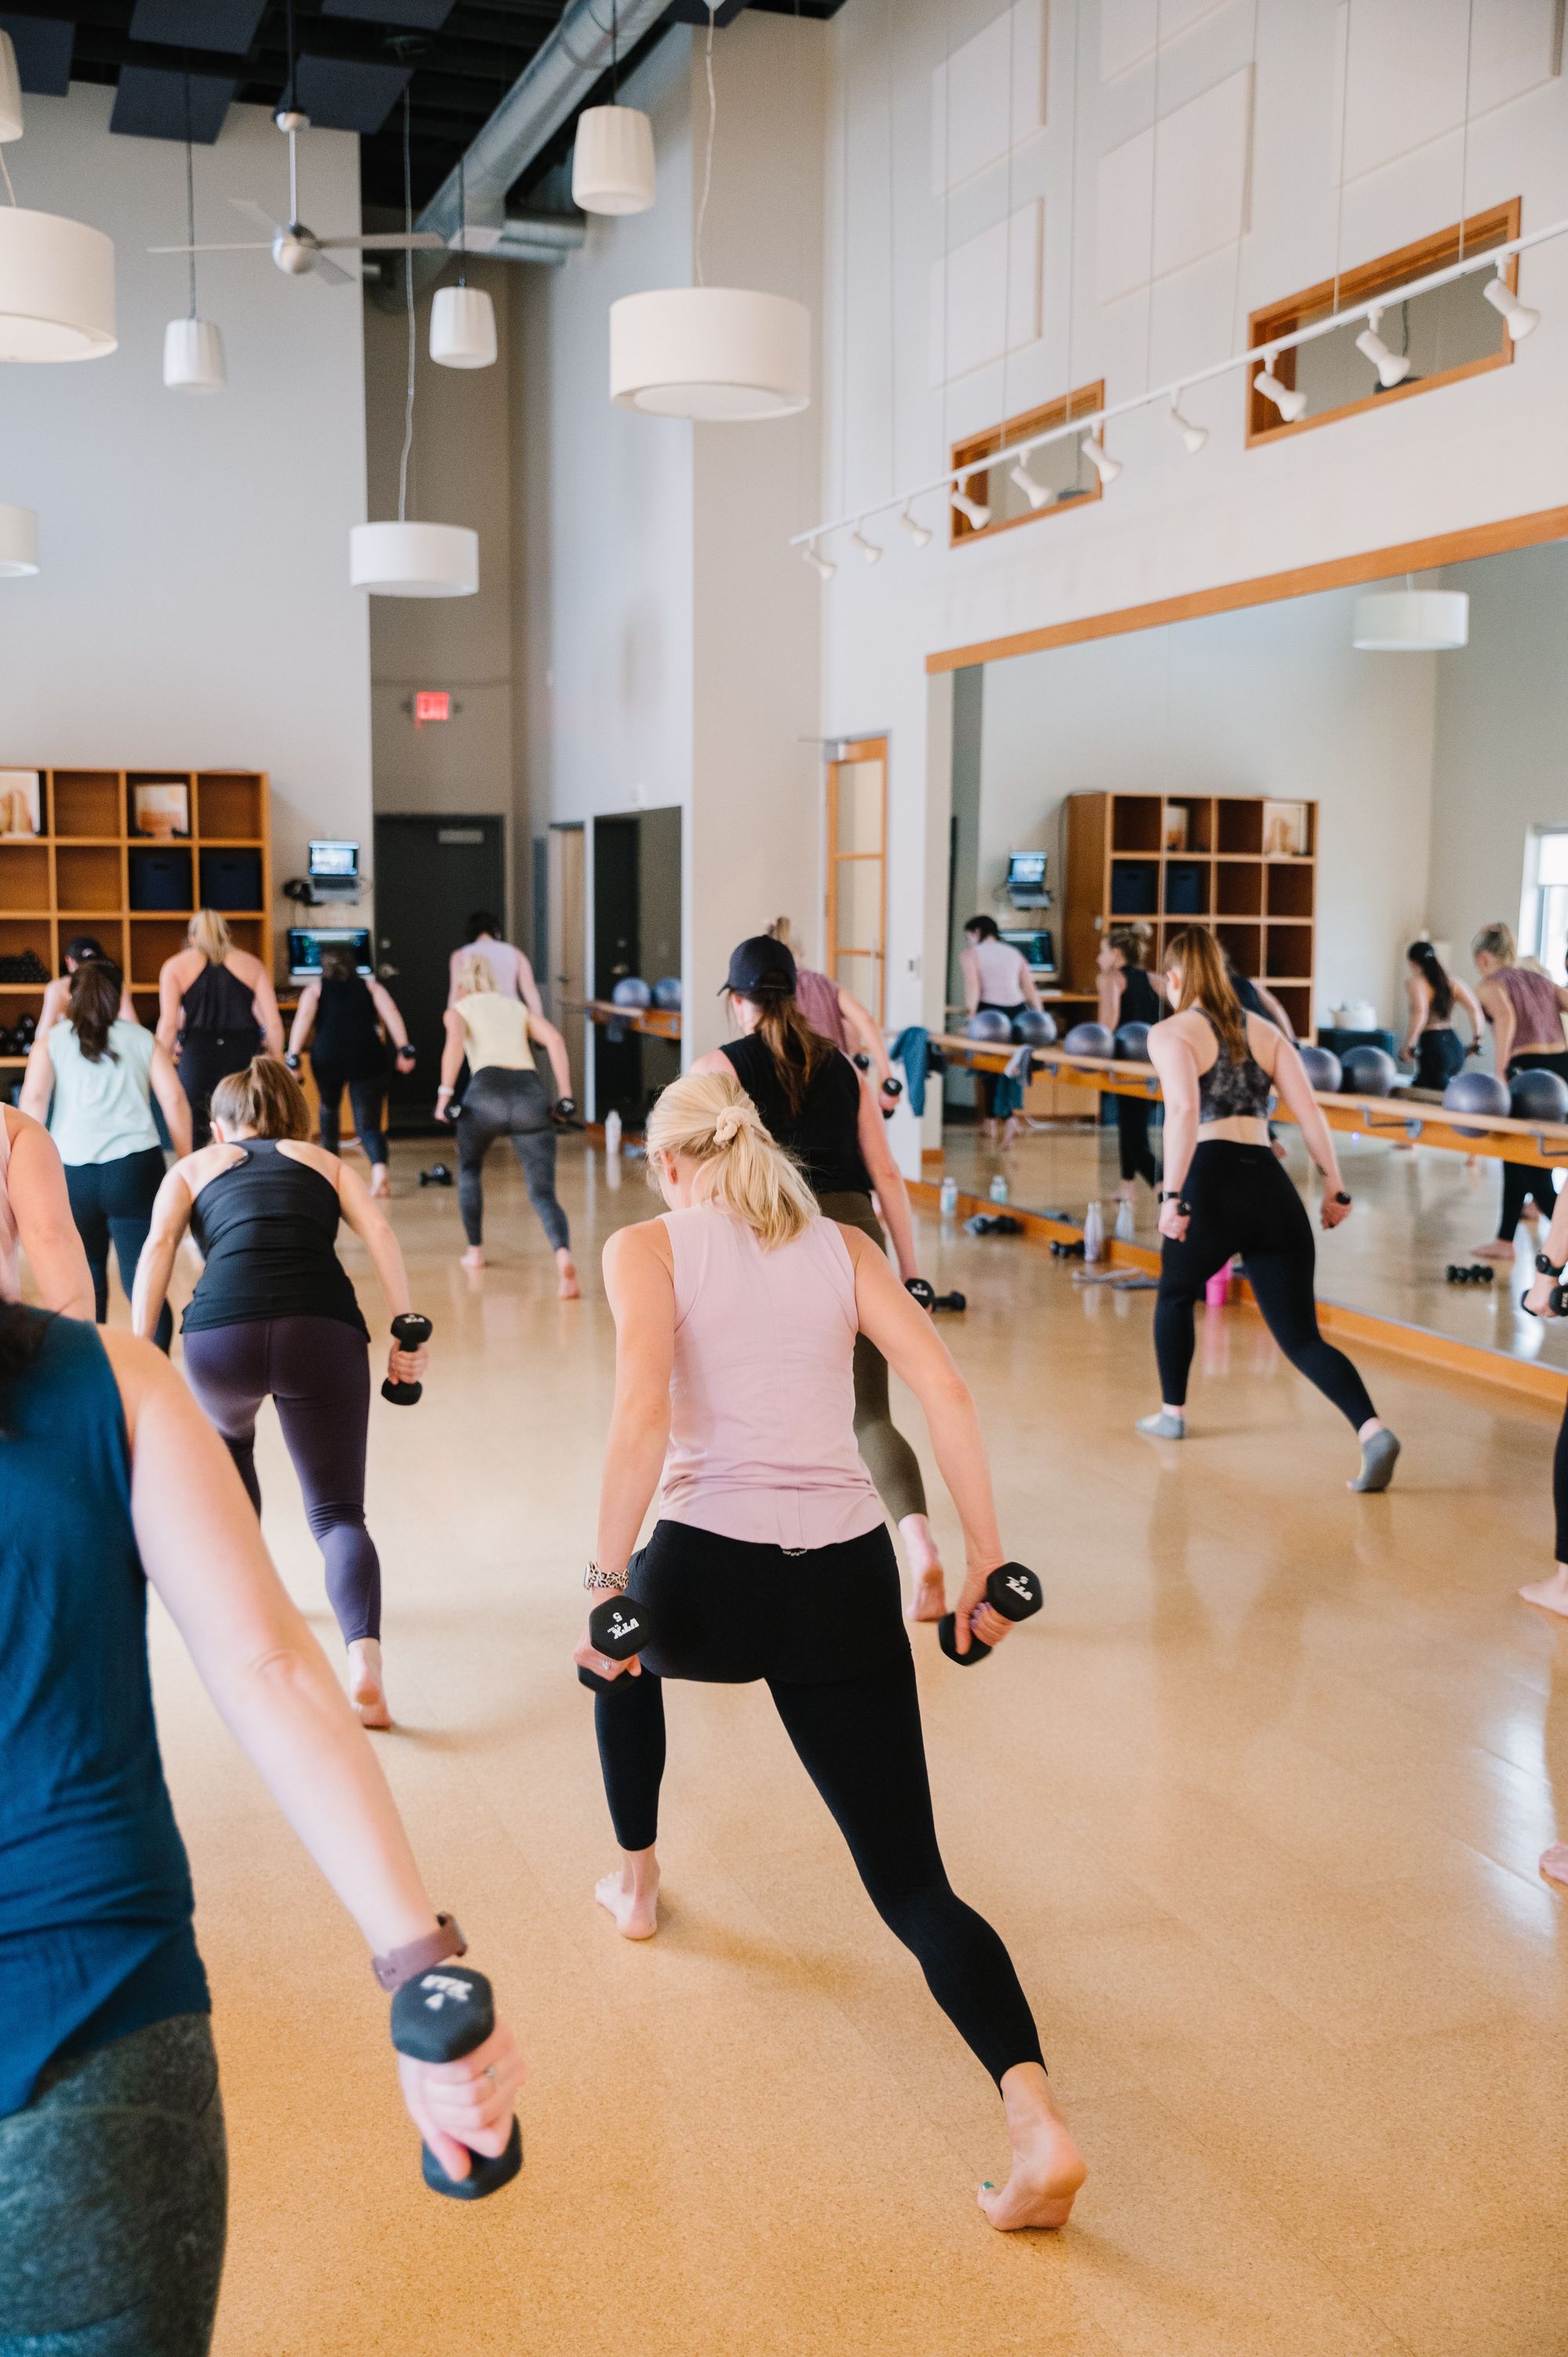 How Barre3 brought balanced wellness to Sioux Falls